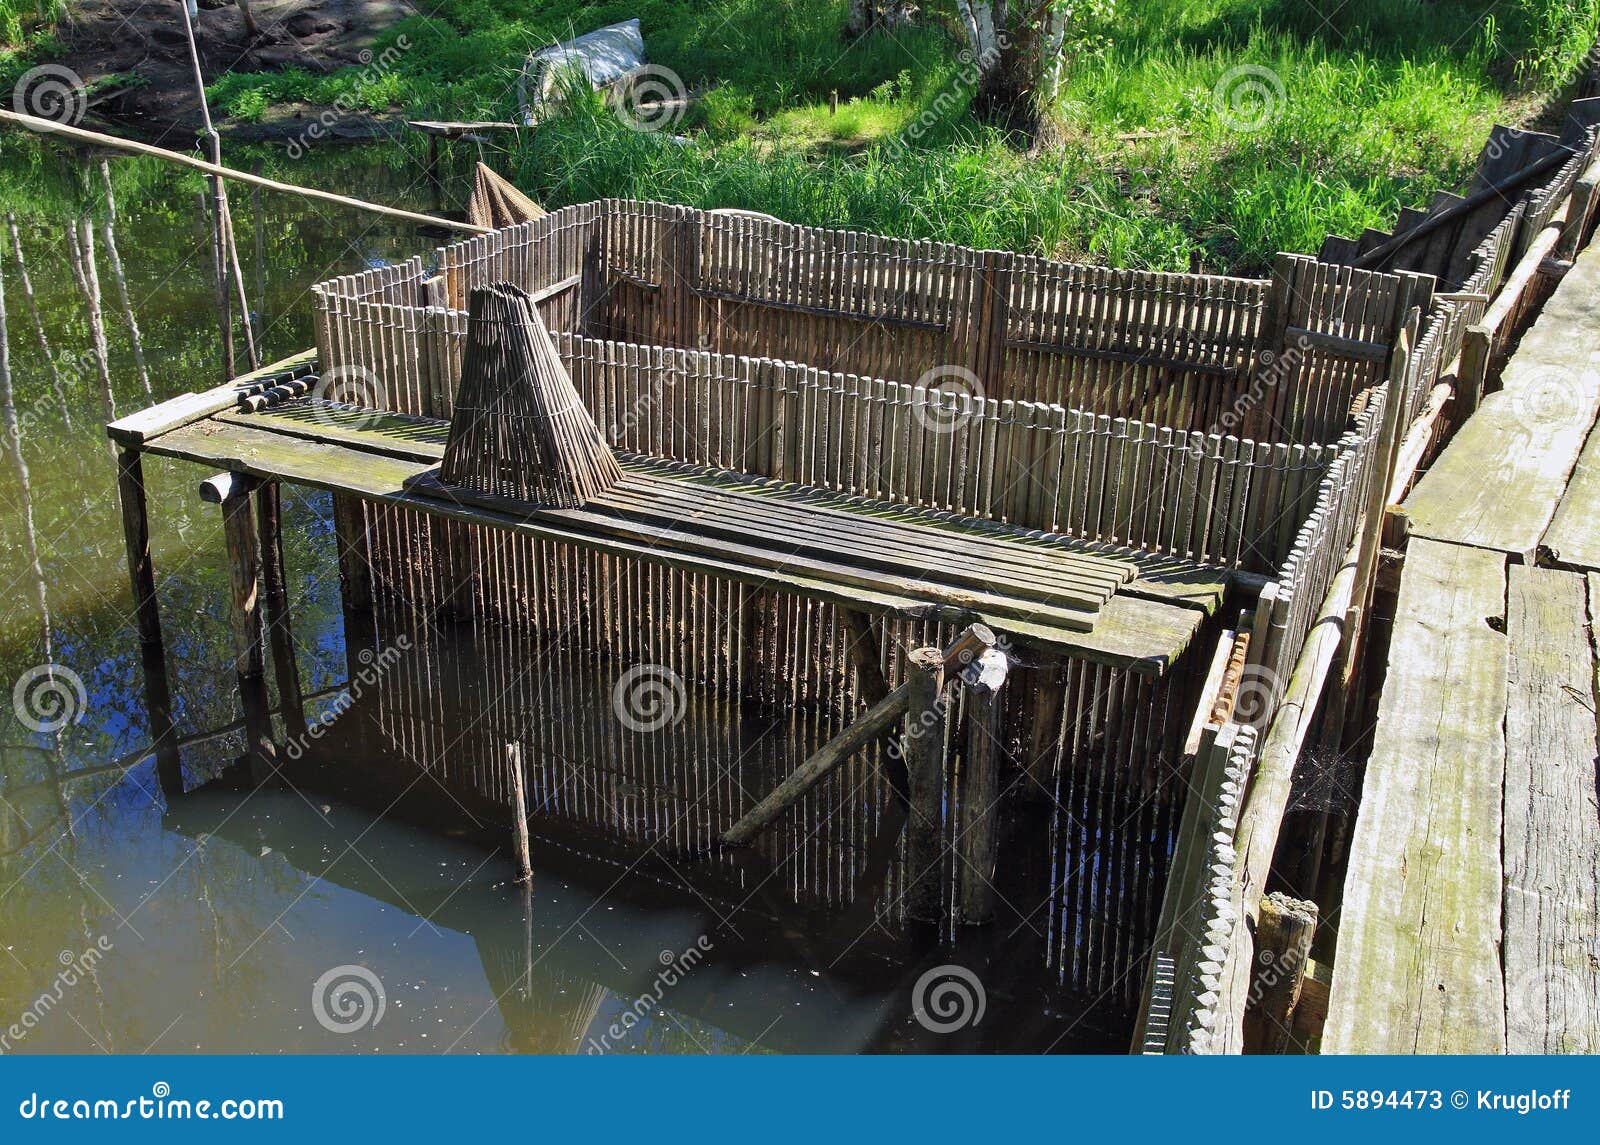 Fishing trap on the river stock image. Image of weaving - 5894473